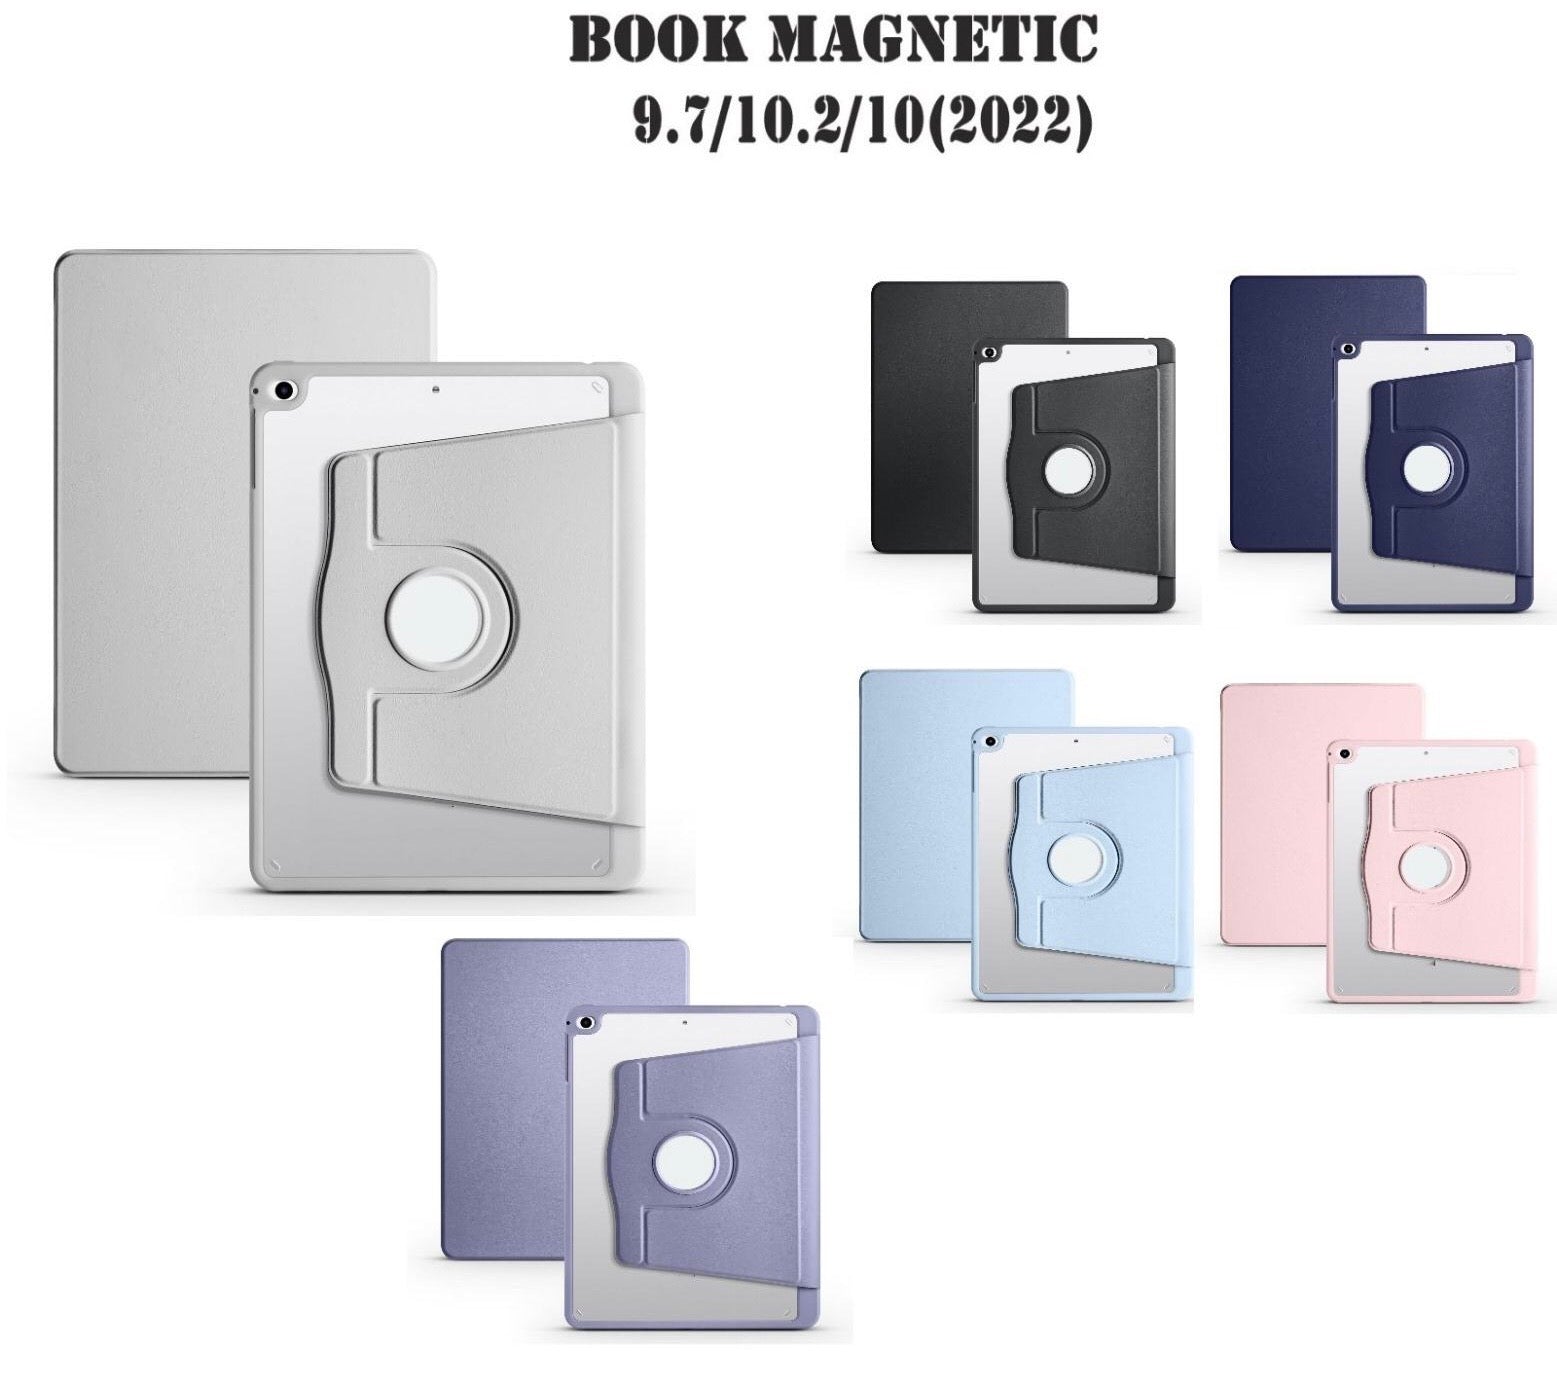 360 Degree Rotation and Magnetic Book Cover for iPad 10th Gen 10.9 inch 2022